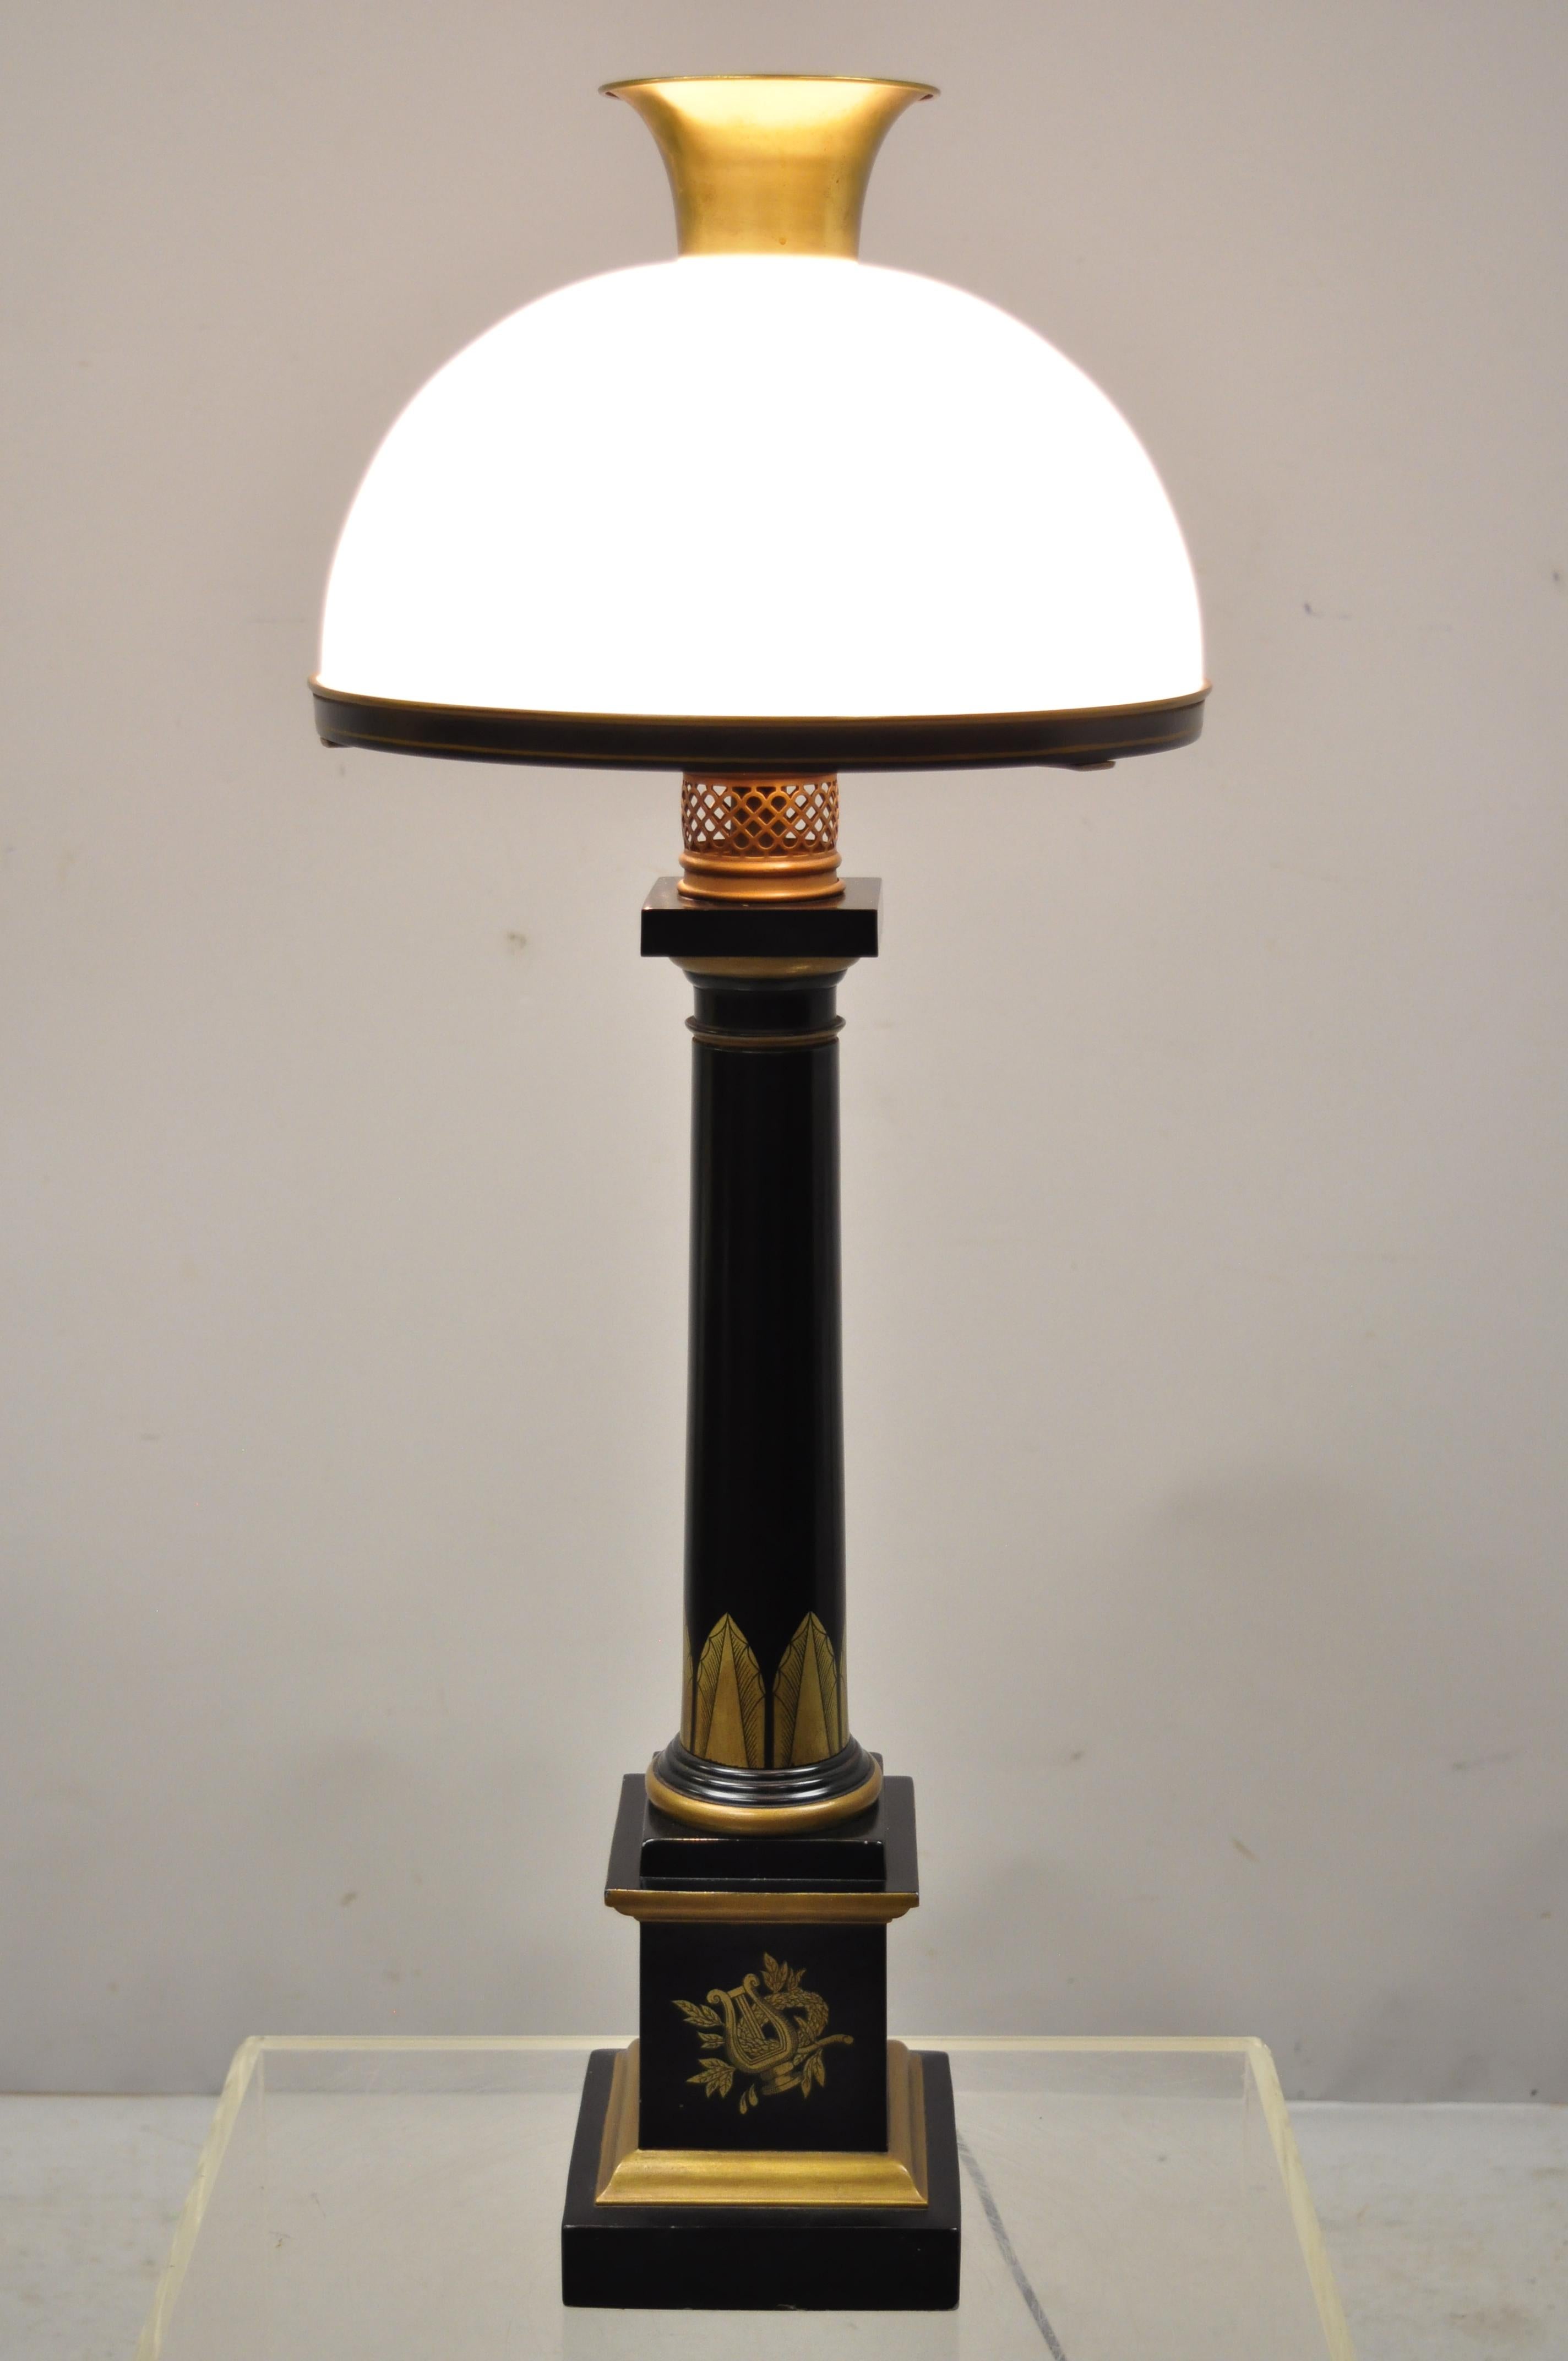 French Empire Tole metal column black gold Bouillotte desk table lamp with glass shade. Item features double light sockets, hand painted details, white milk glass dome shade with brass mount, very nice vintage, quality French craftsmanship, great